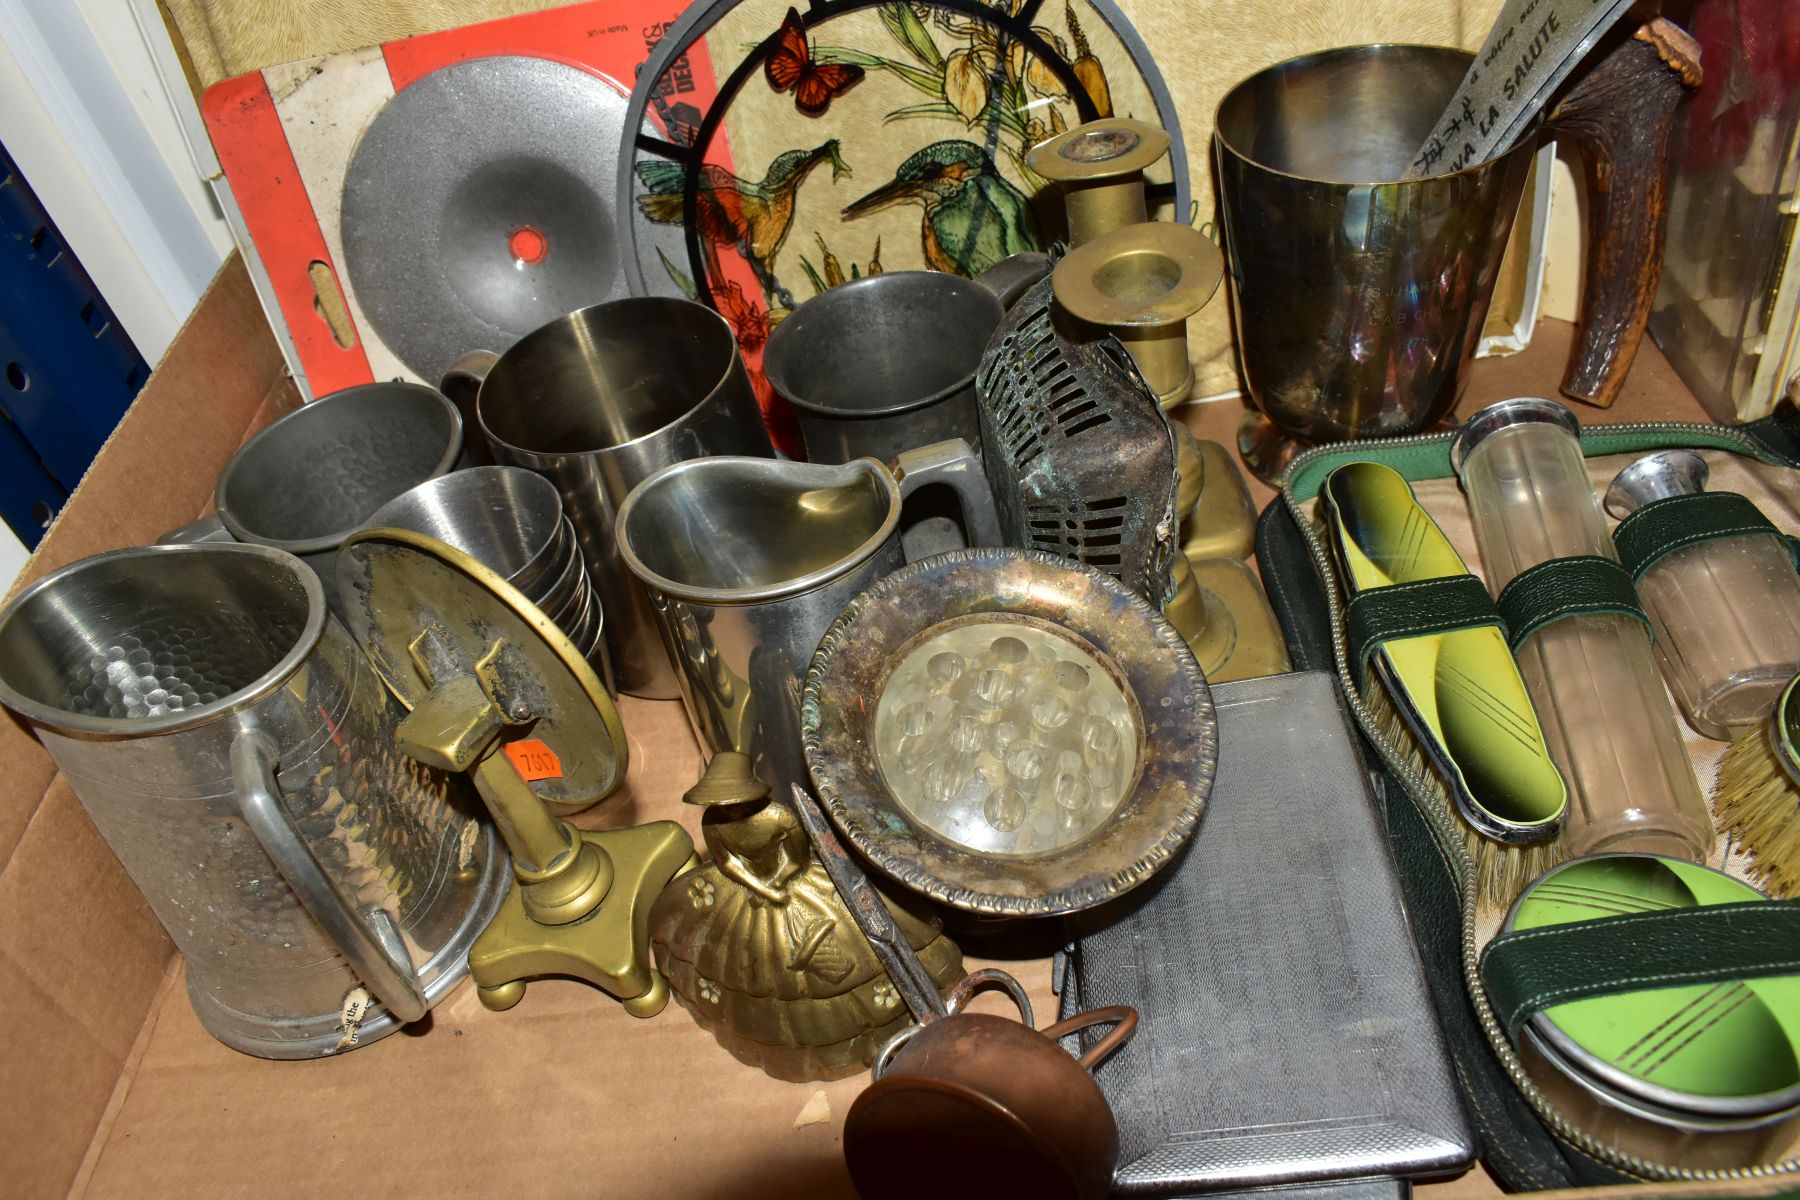 FIVE BOXES OF ART DECO DINNER SERVICE, CERAMICS, GLASS, METALWARES, MINIATURE BOTTLES AND SUNDRY - Image 8 of 16